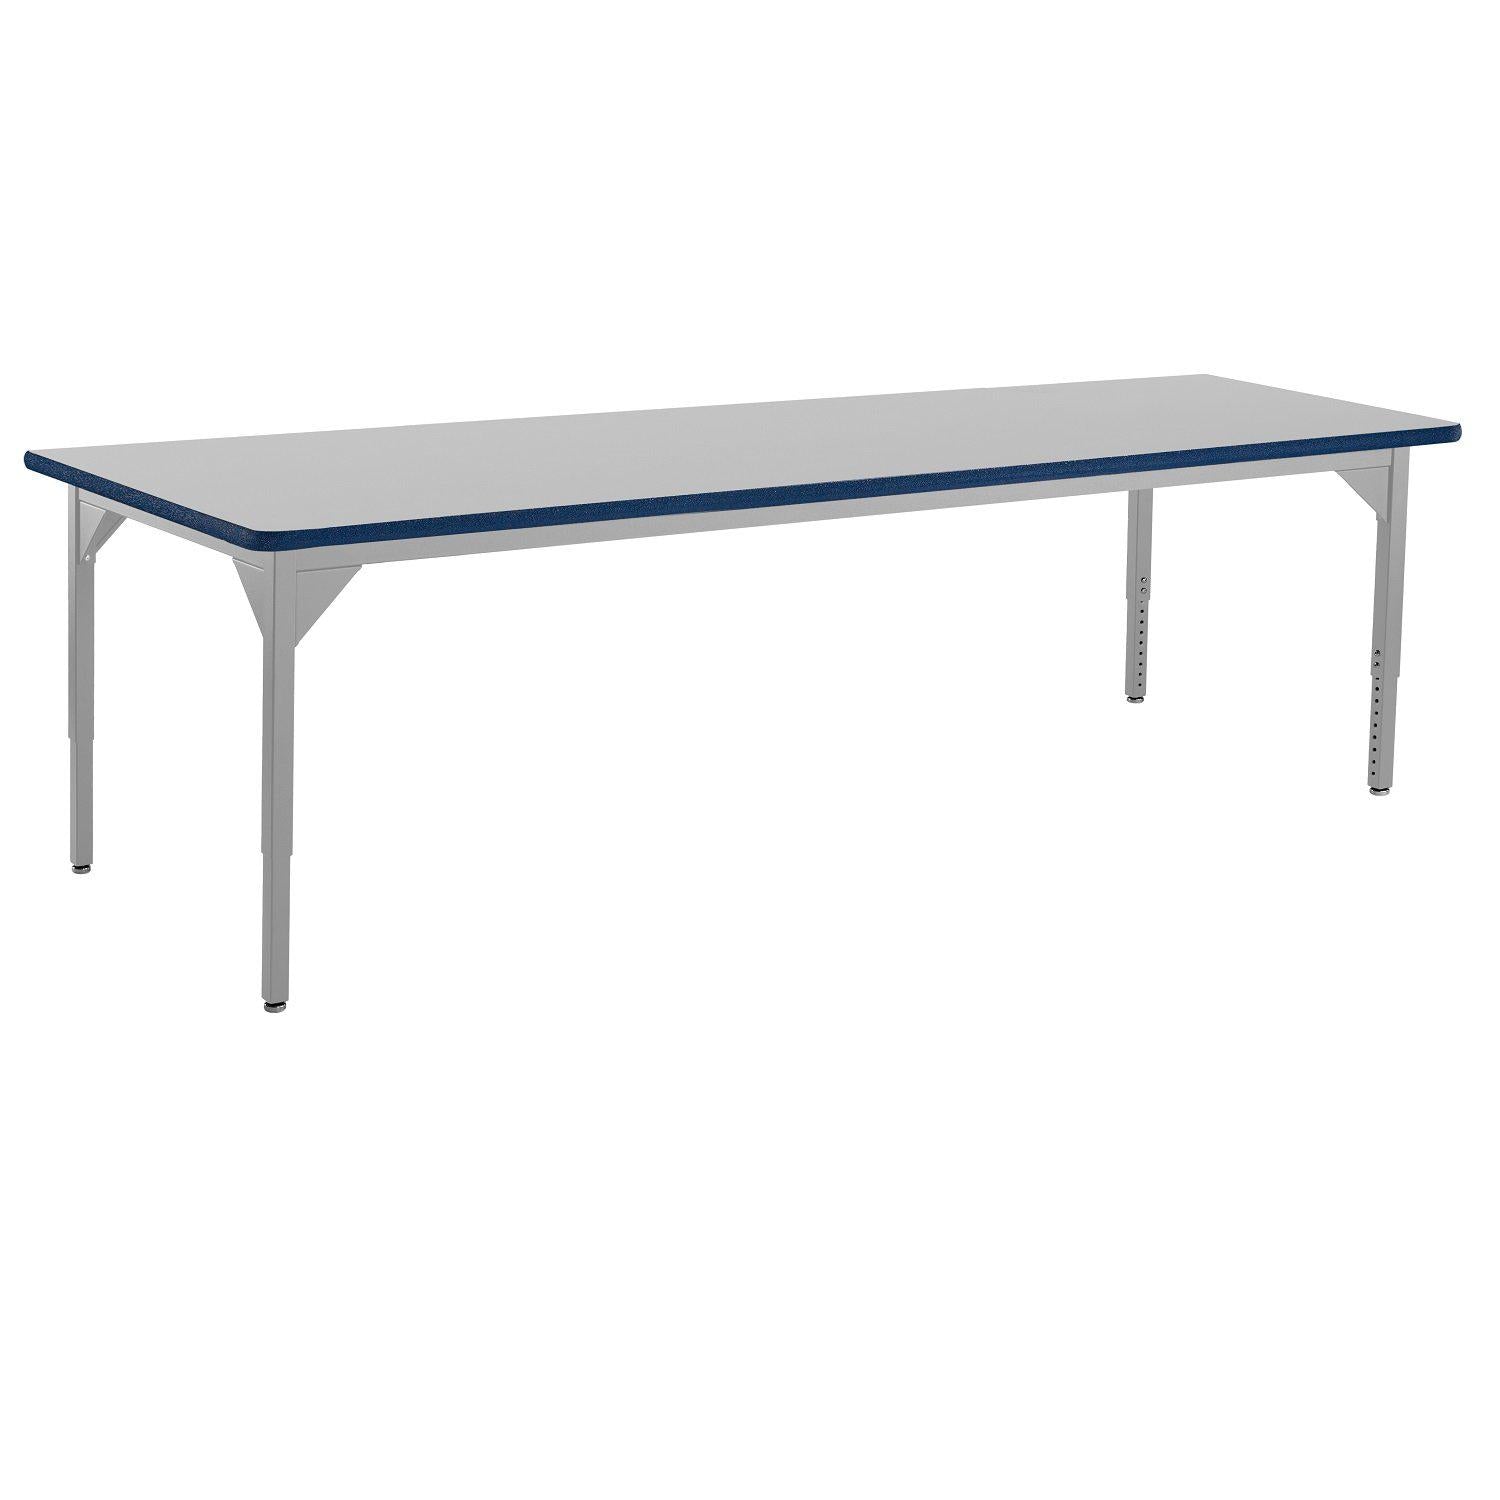 Heavy-Duty Height-Adjustable Utility Table, Soft Grey Frame, 42" x 72", Supreme High-Pressure Laminate Top with Black ProtectEdge